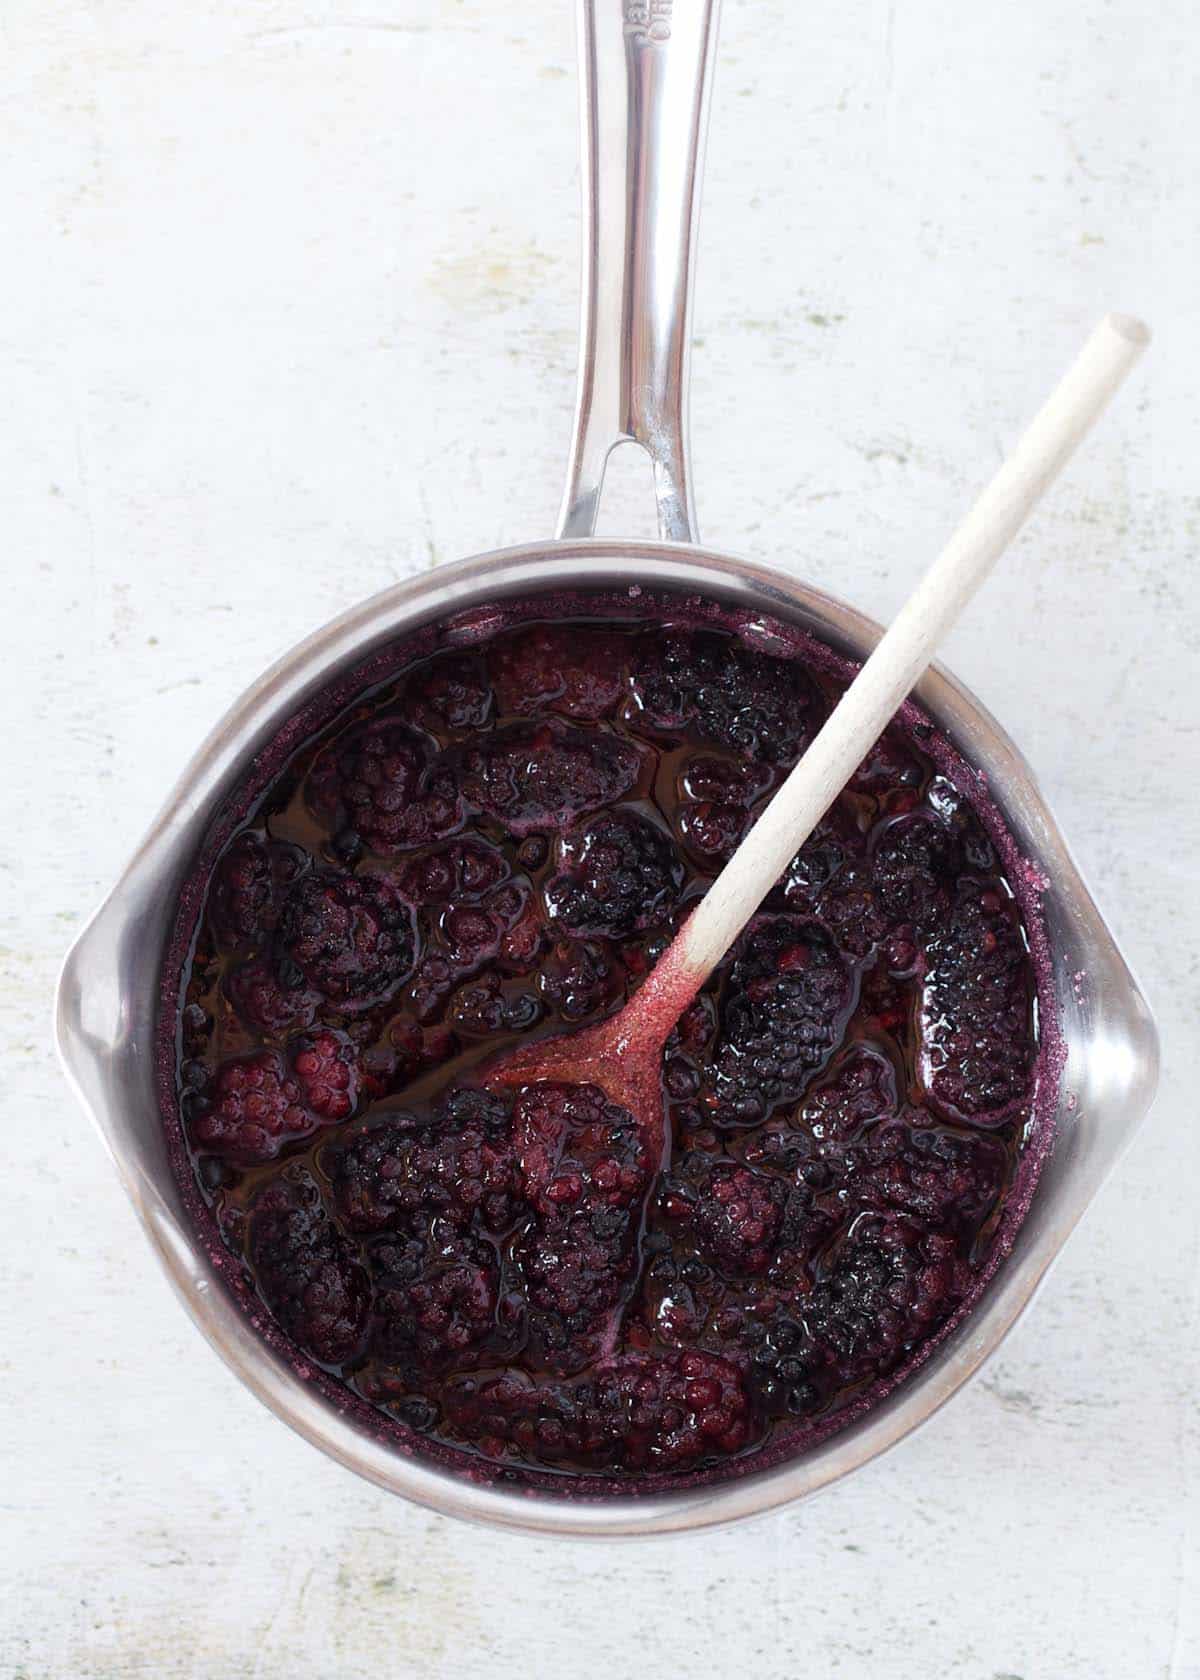 Blackberry compote in a saucepan with a wooden soon in it